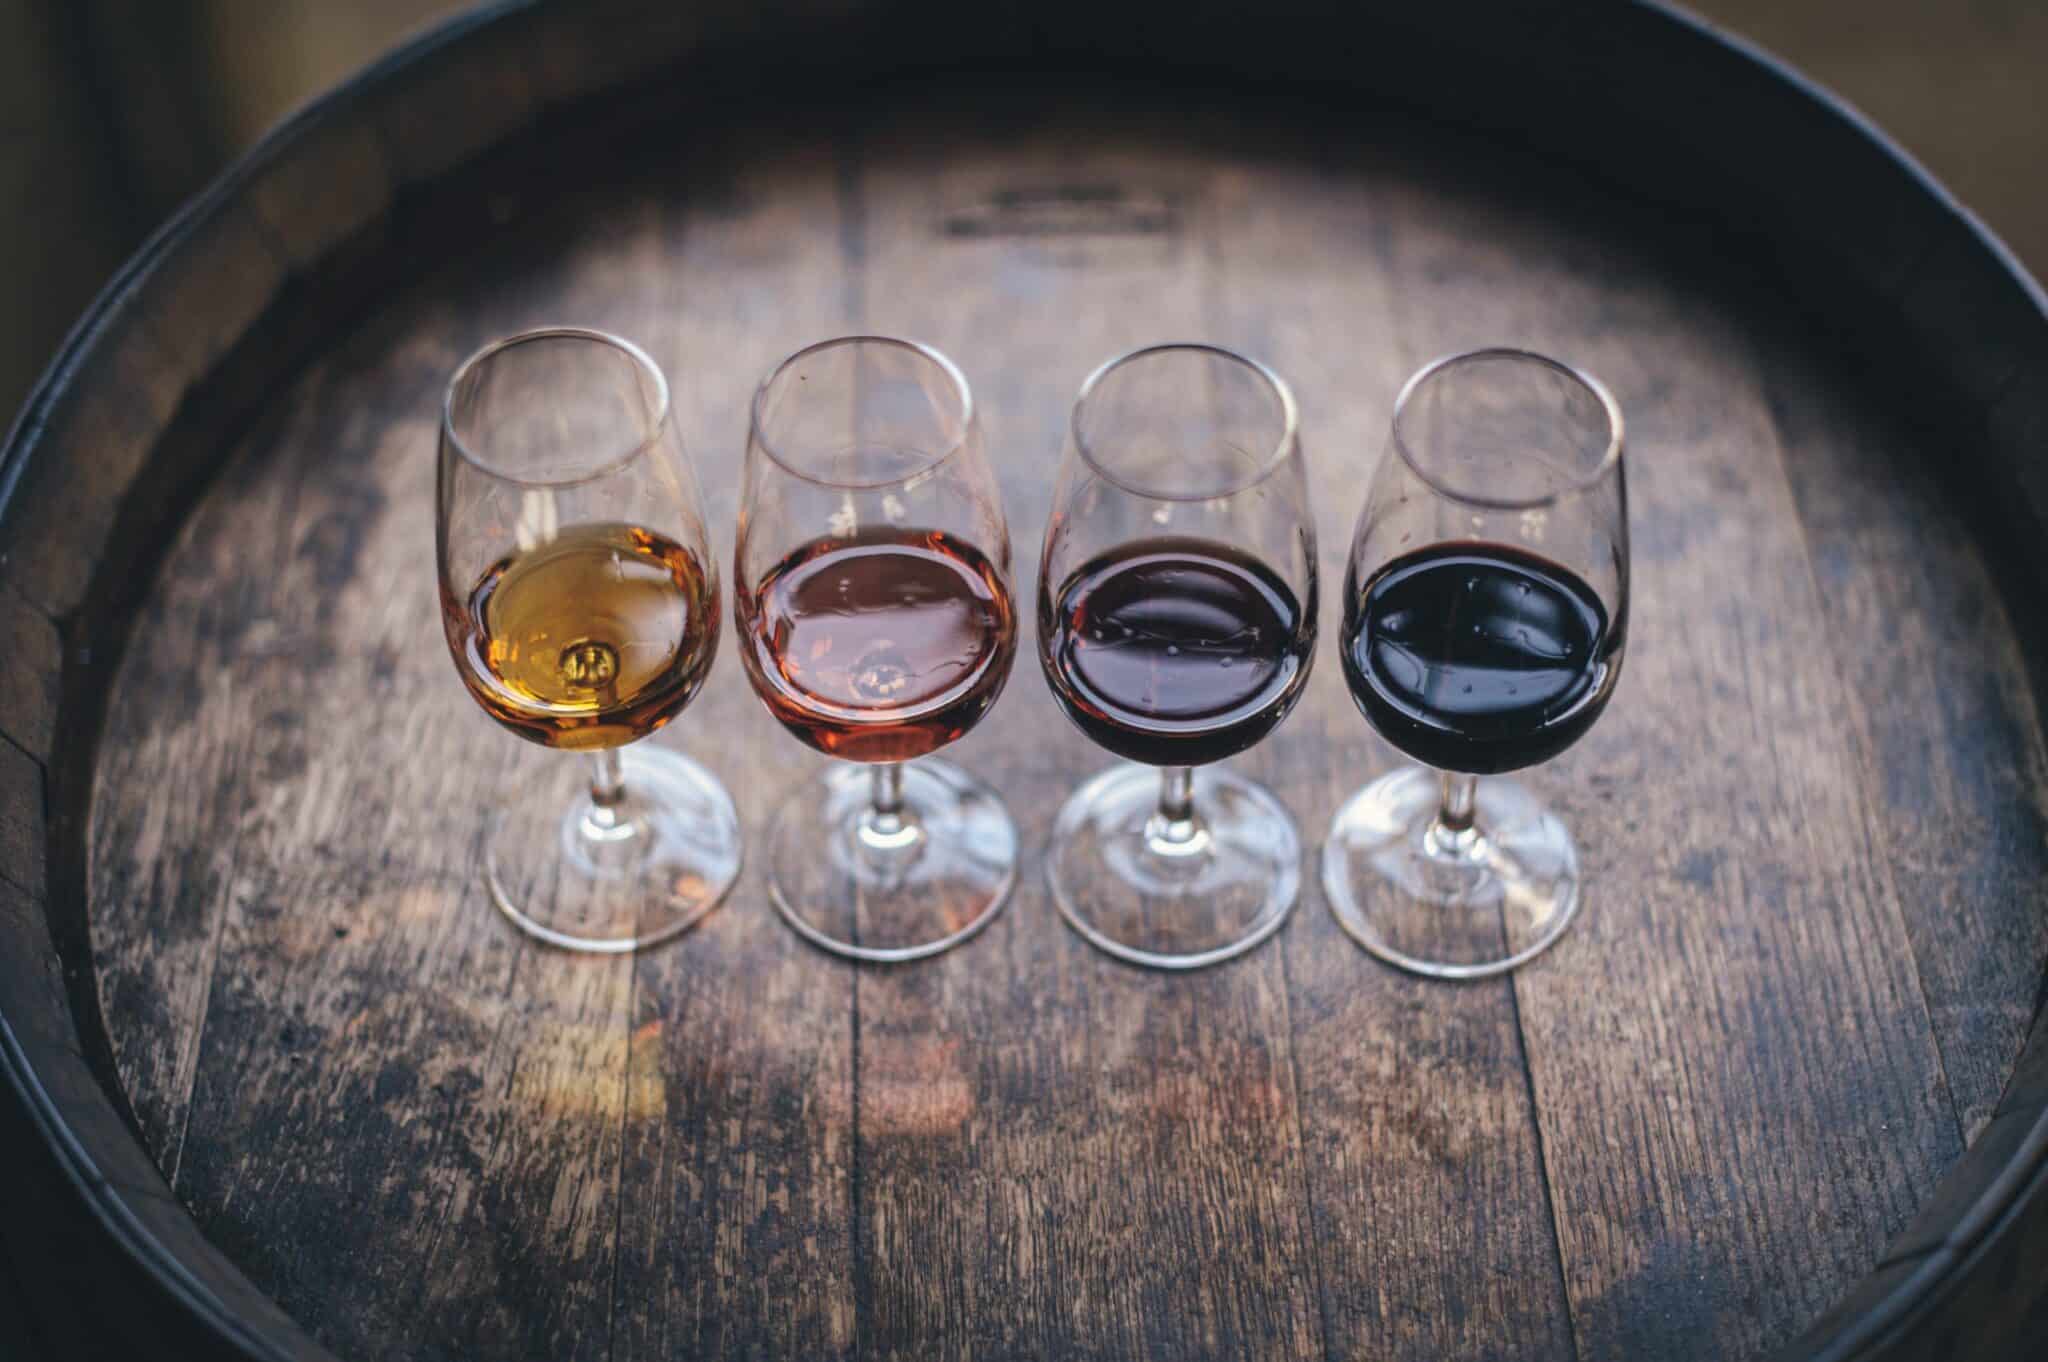 Four wine glasses filled with different wines, sitting atop a wine barrel.